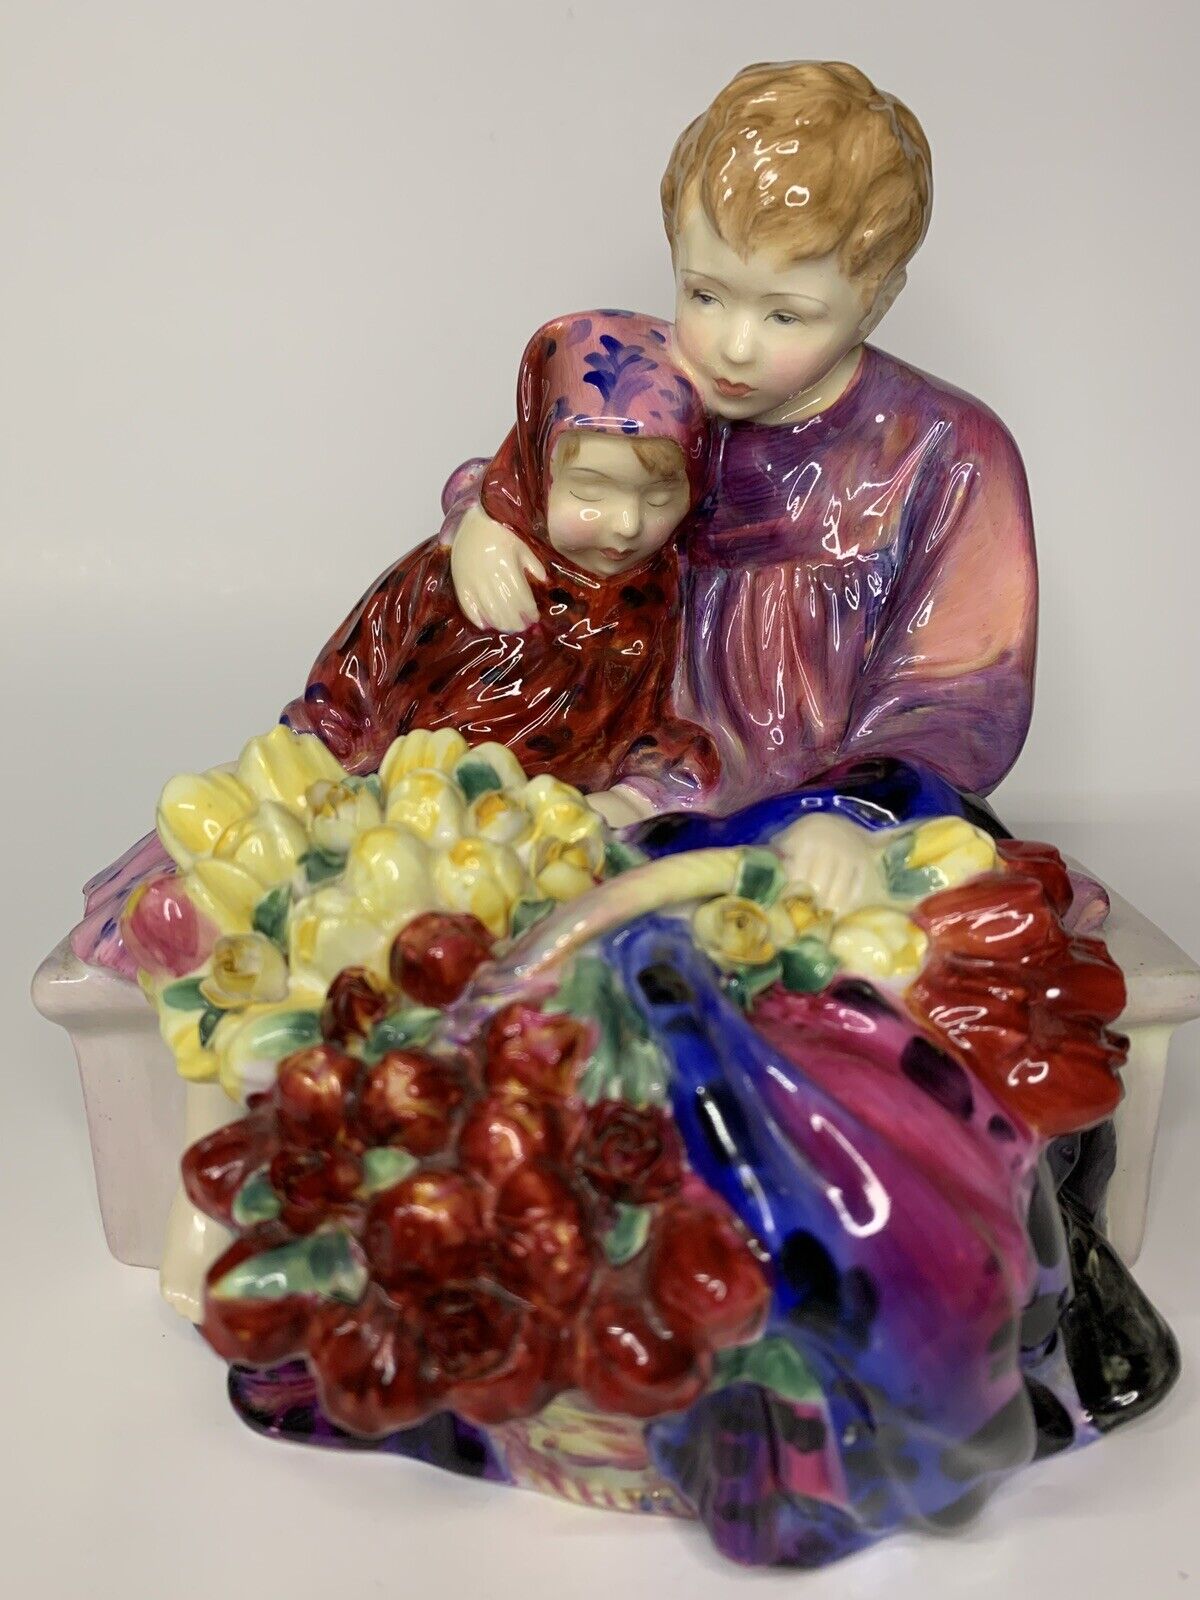 Royal Doulton The Flower Sellers Children Early Figurine 1929-1930 Signed